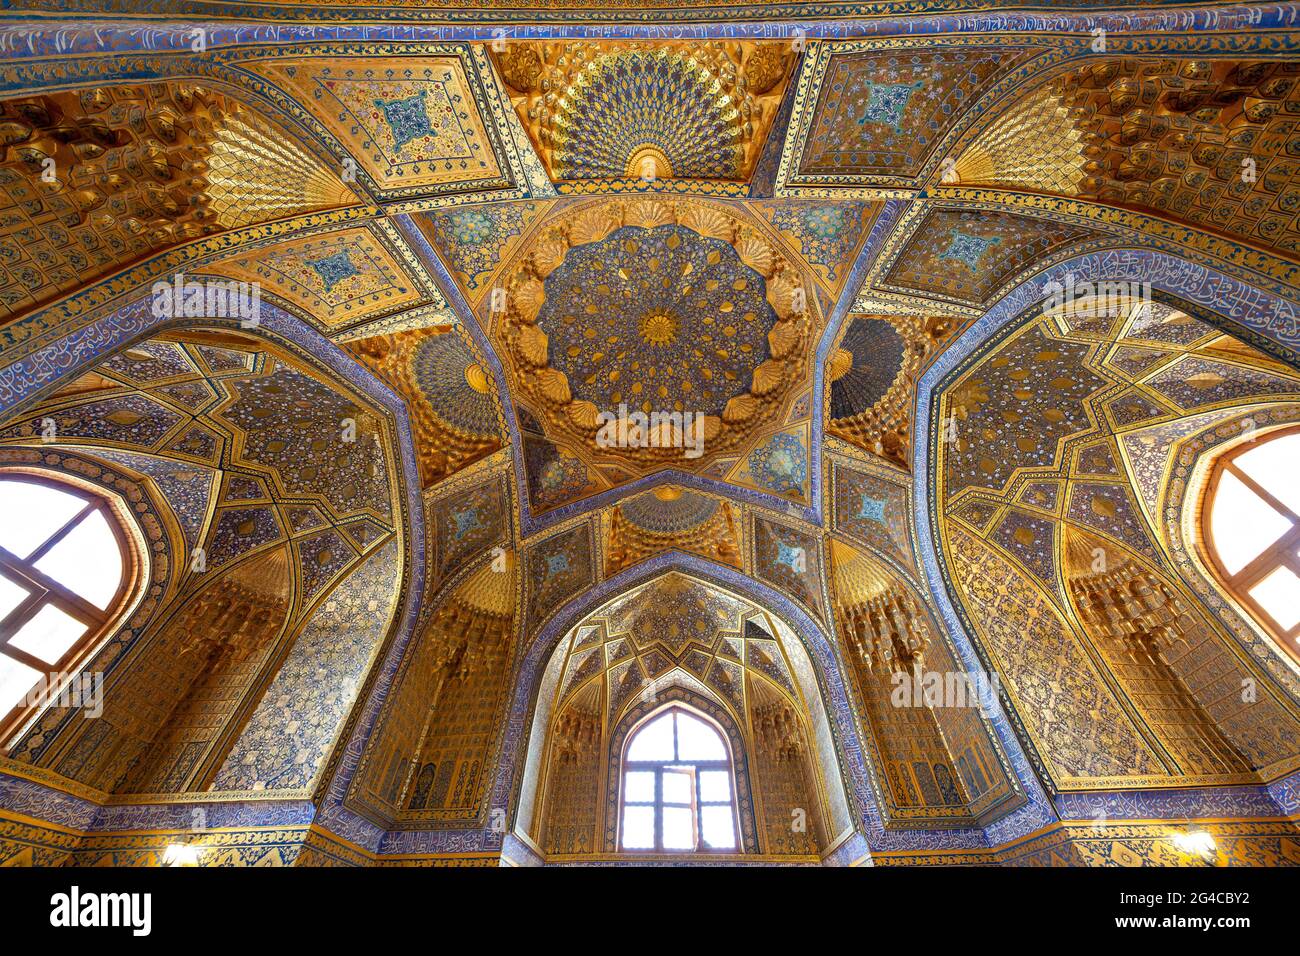 Ceiling and architectural features of Aksaray Mausoleum in Samarkand, Uzbekistan Stock Photo